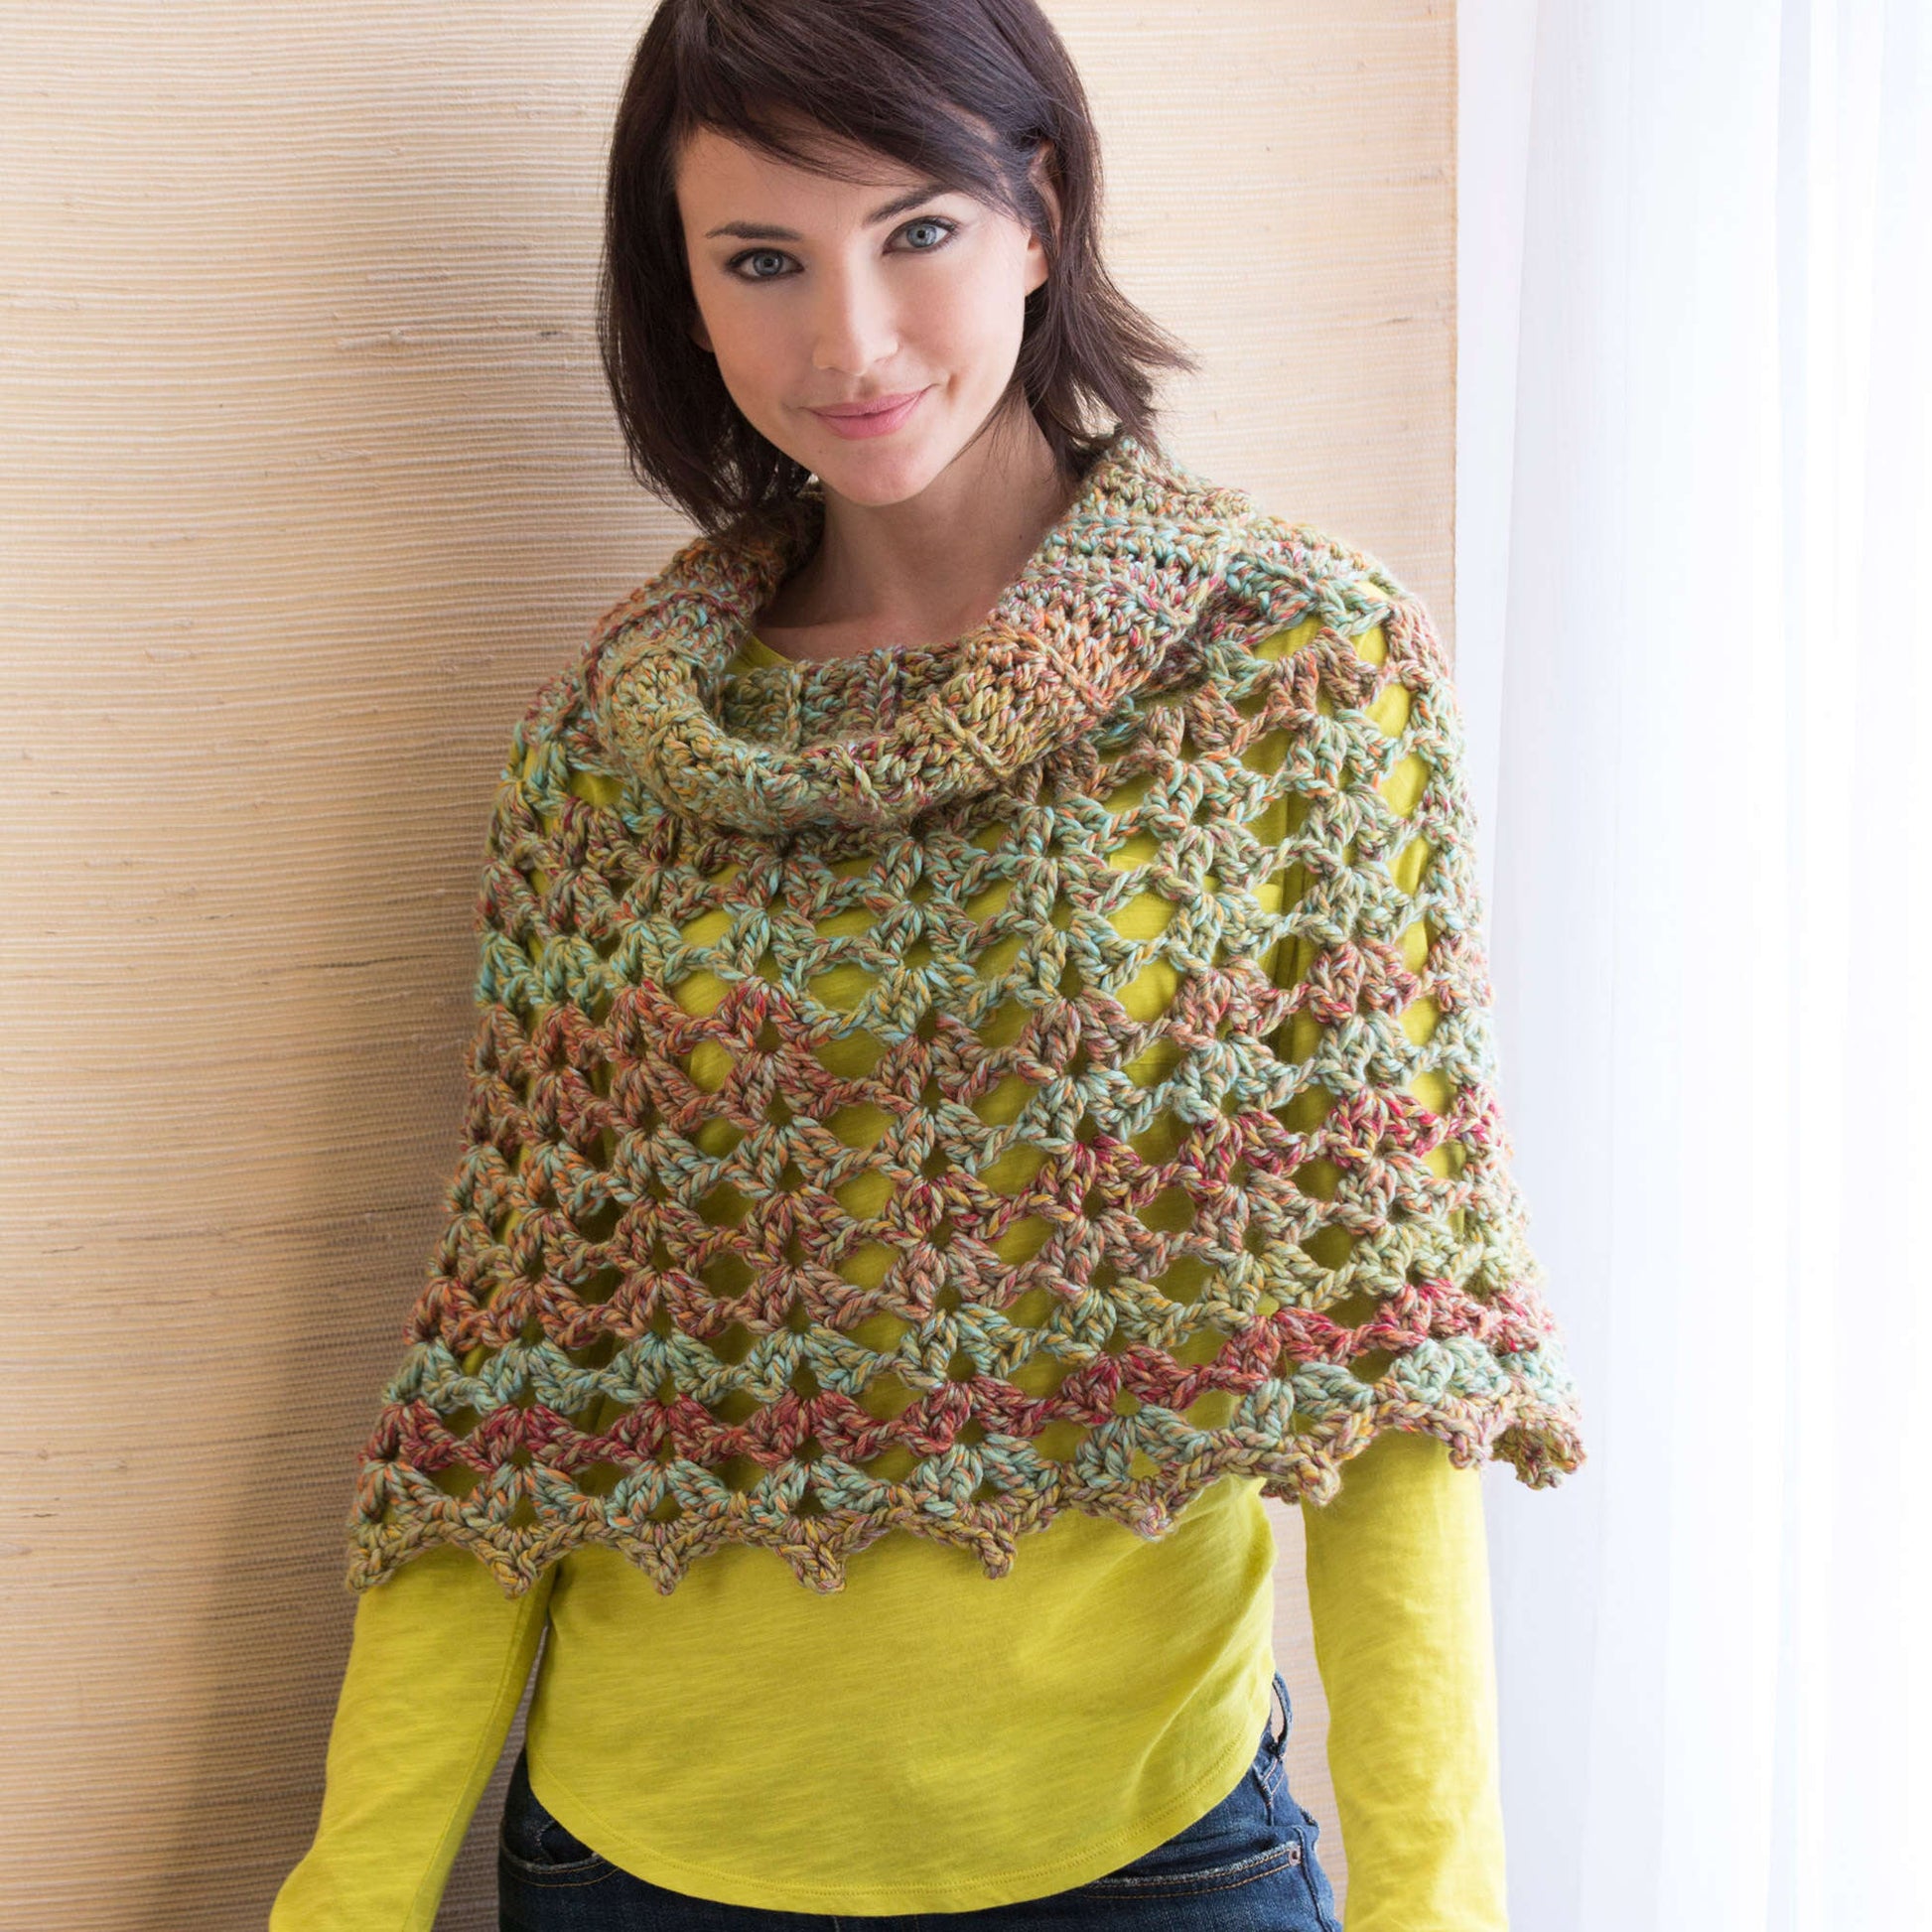 Free Red Crochet Heart Chic Cowl Neck Poncho Pattern